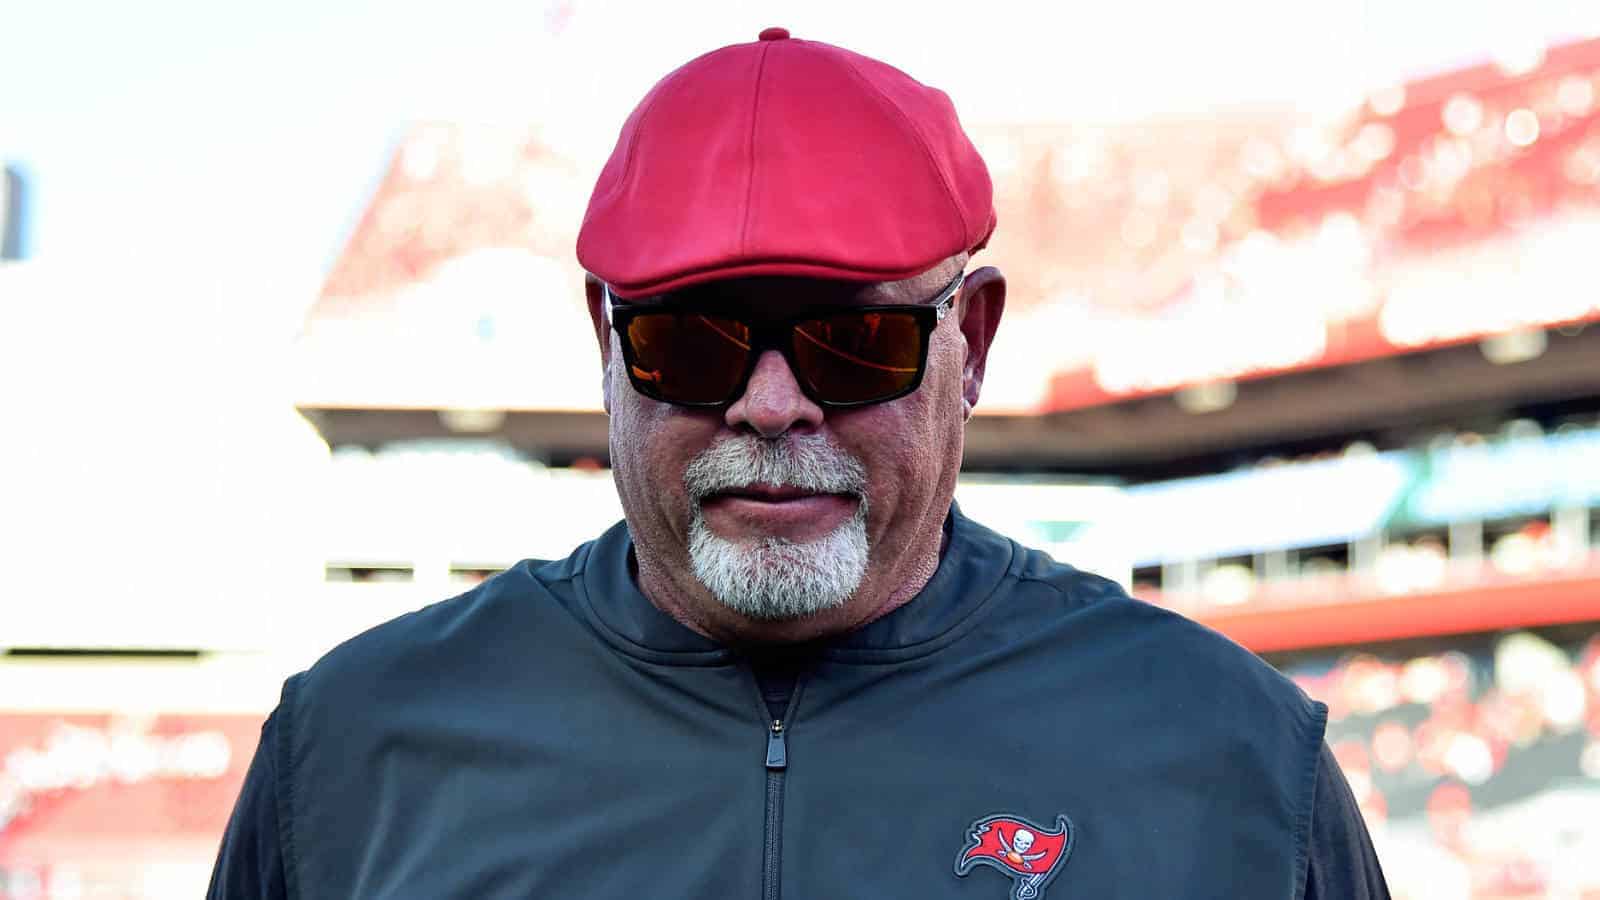 Tampa Bay Buccaneers head coach Bruce Arians has a strong message to players when it comes to taking the COVID-19 vaccine